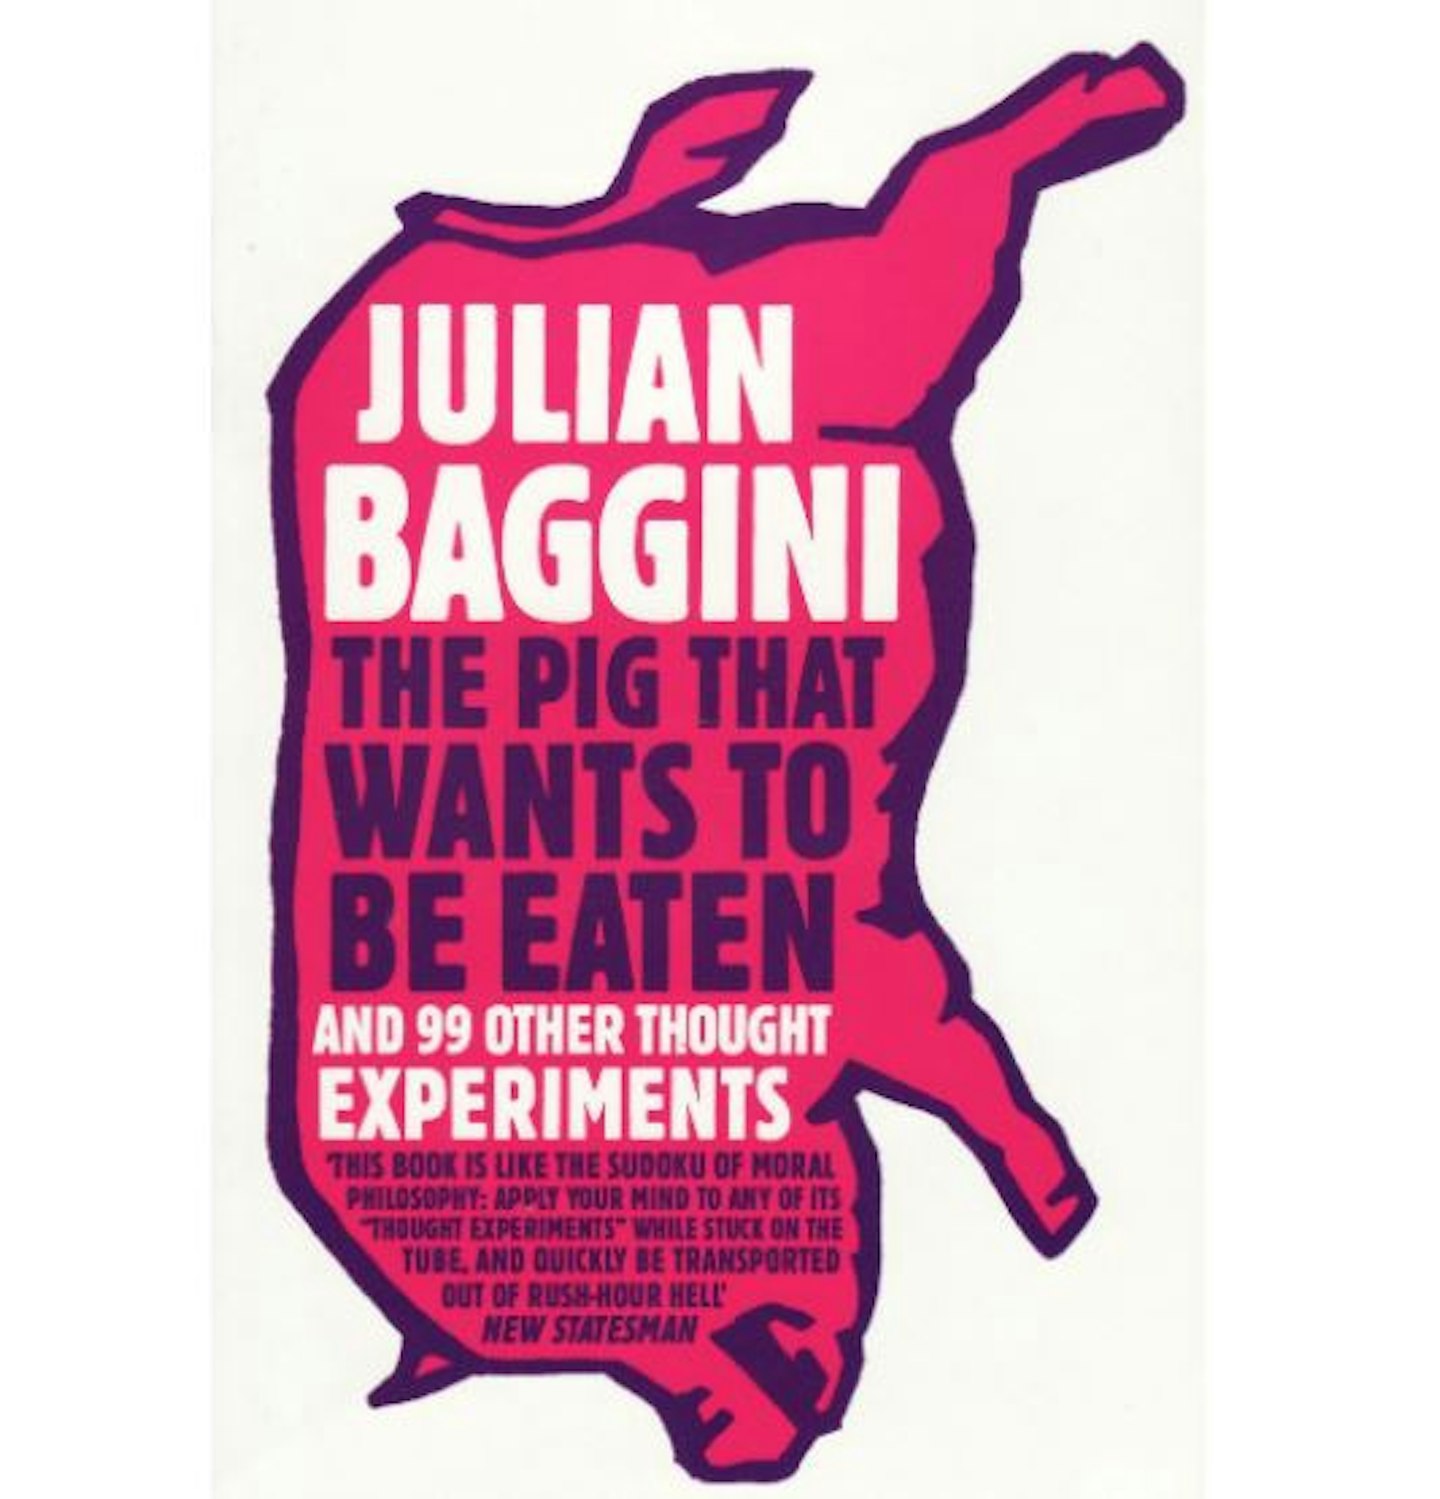 The Pig That Wants To Be Eaten: And 99 Other Thought Experiments